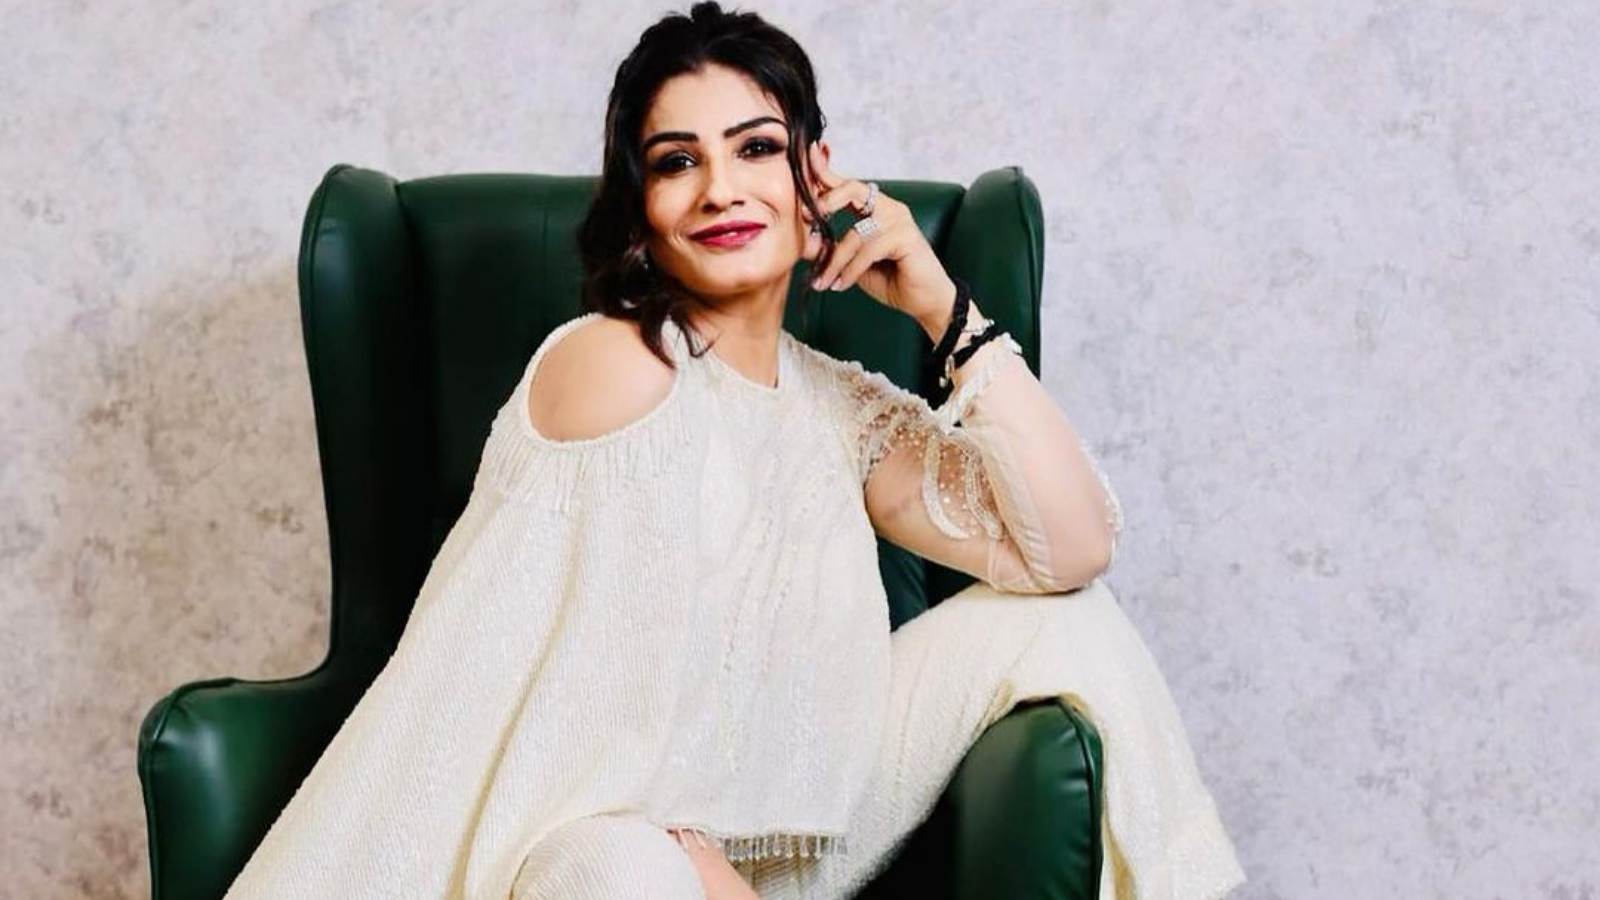 Raveena Tandon Ki Xxx Xxx Video - Raveena Tandon says South film industry doesn't make 'elitist' films while  Hindi movies have become 'westernised': 'They have started making DVD  copiesâ€¦' | Bollywood News - The Indian Express